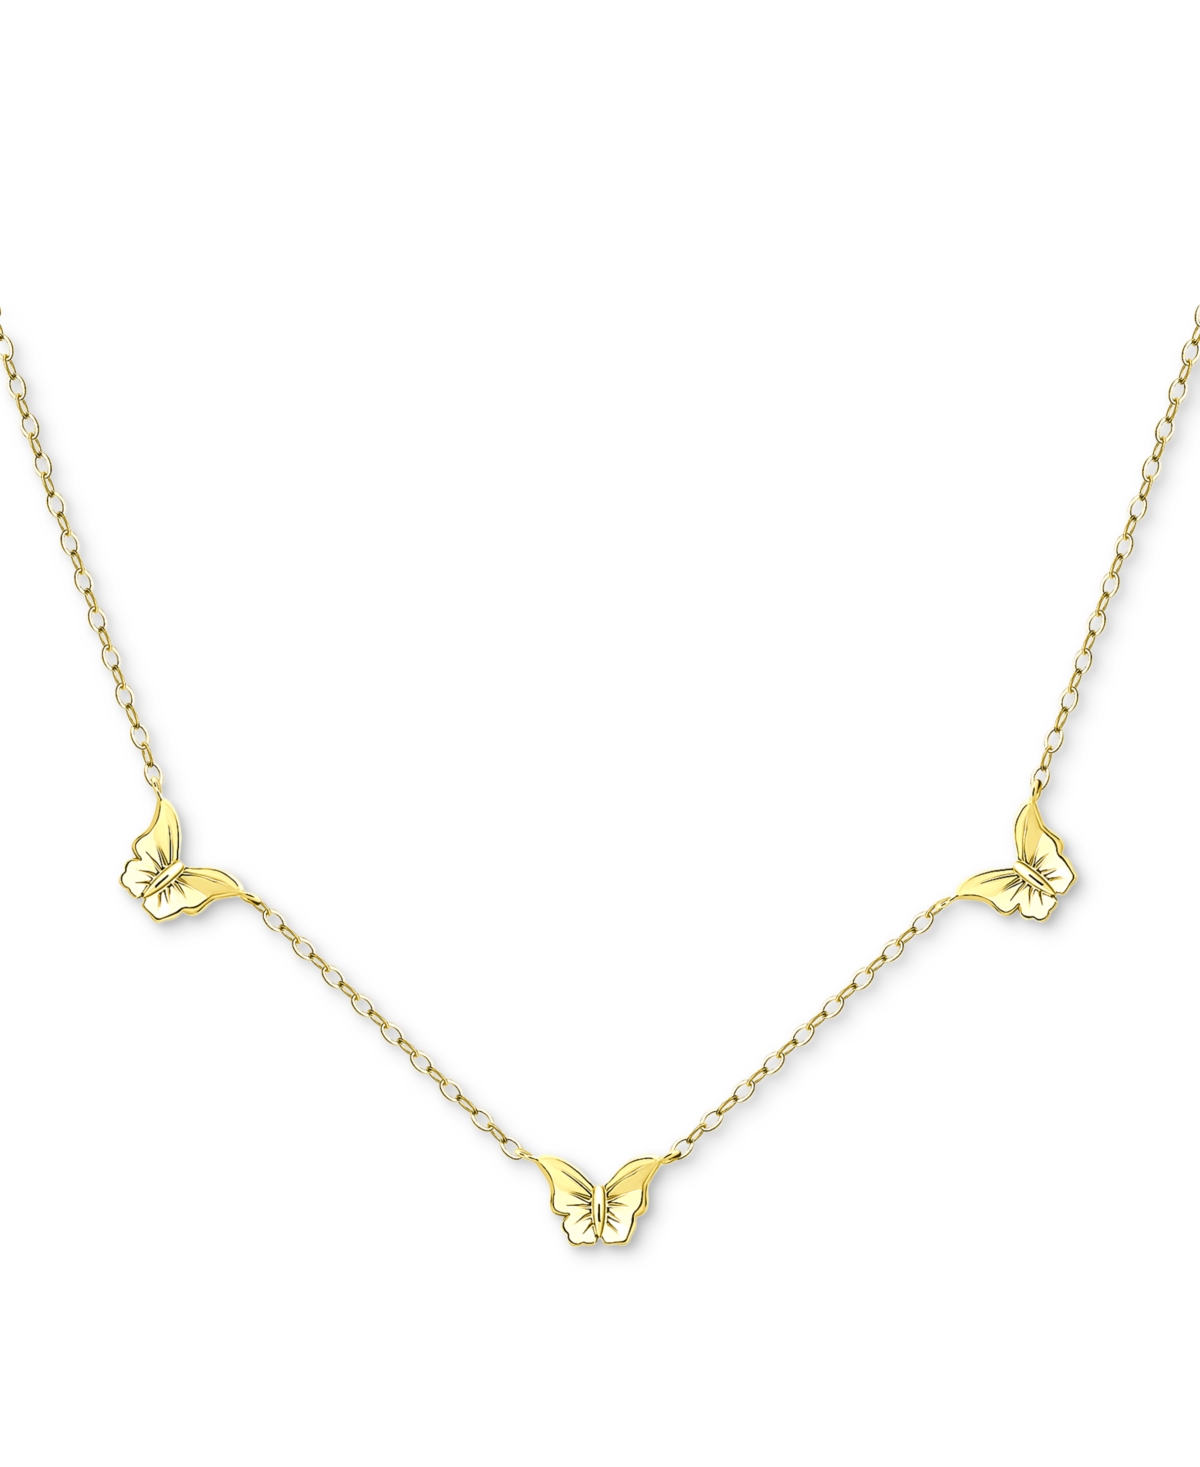 Giani Bernini Butterfly Trio Collar Necklace, 16" + 2" Extender, Created For Macy's In Gold Over Silver